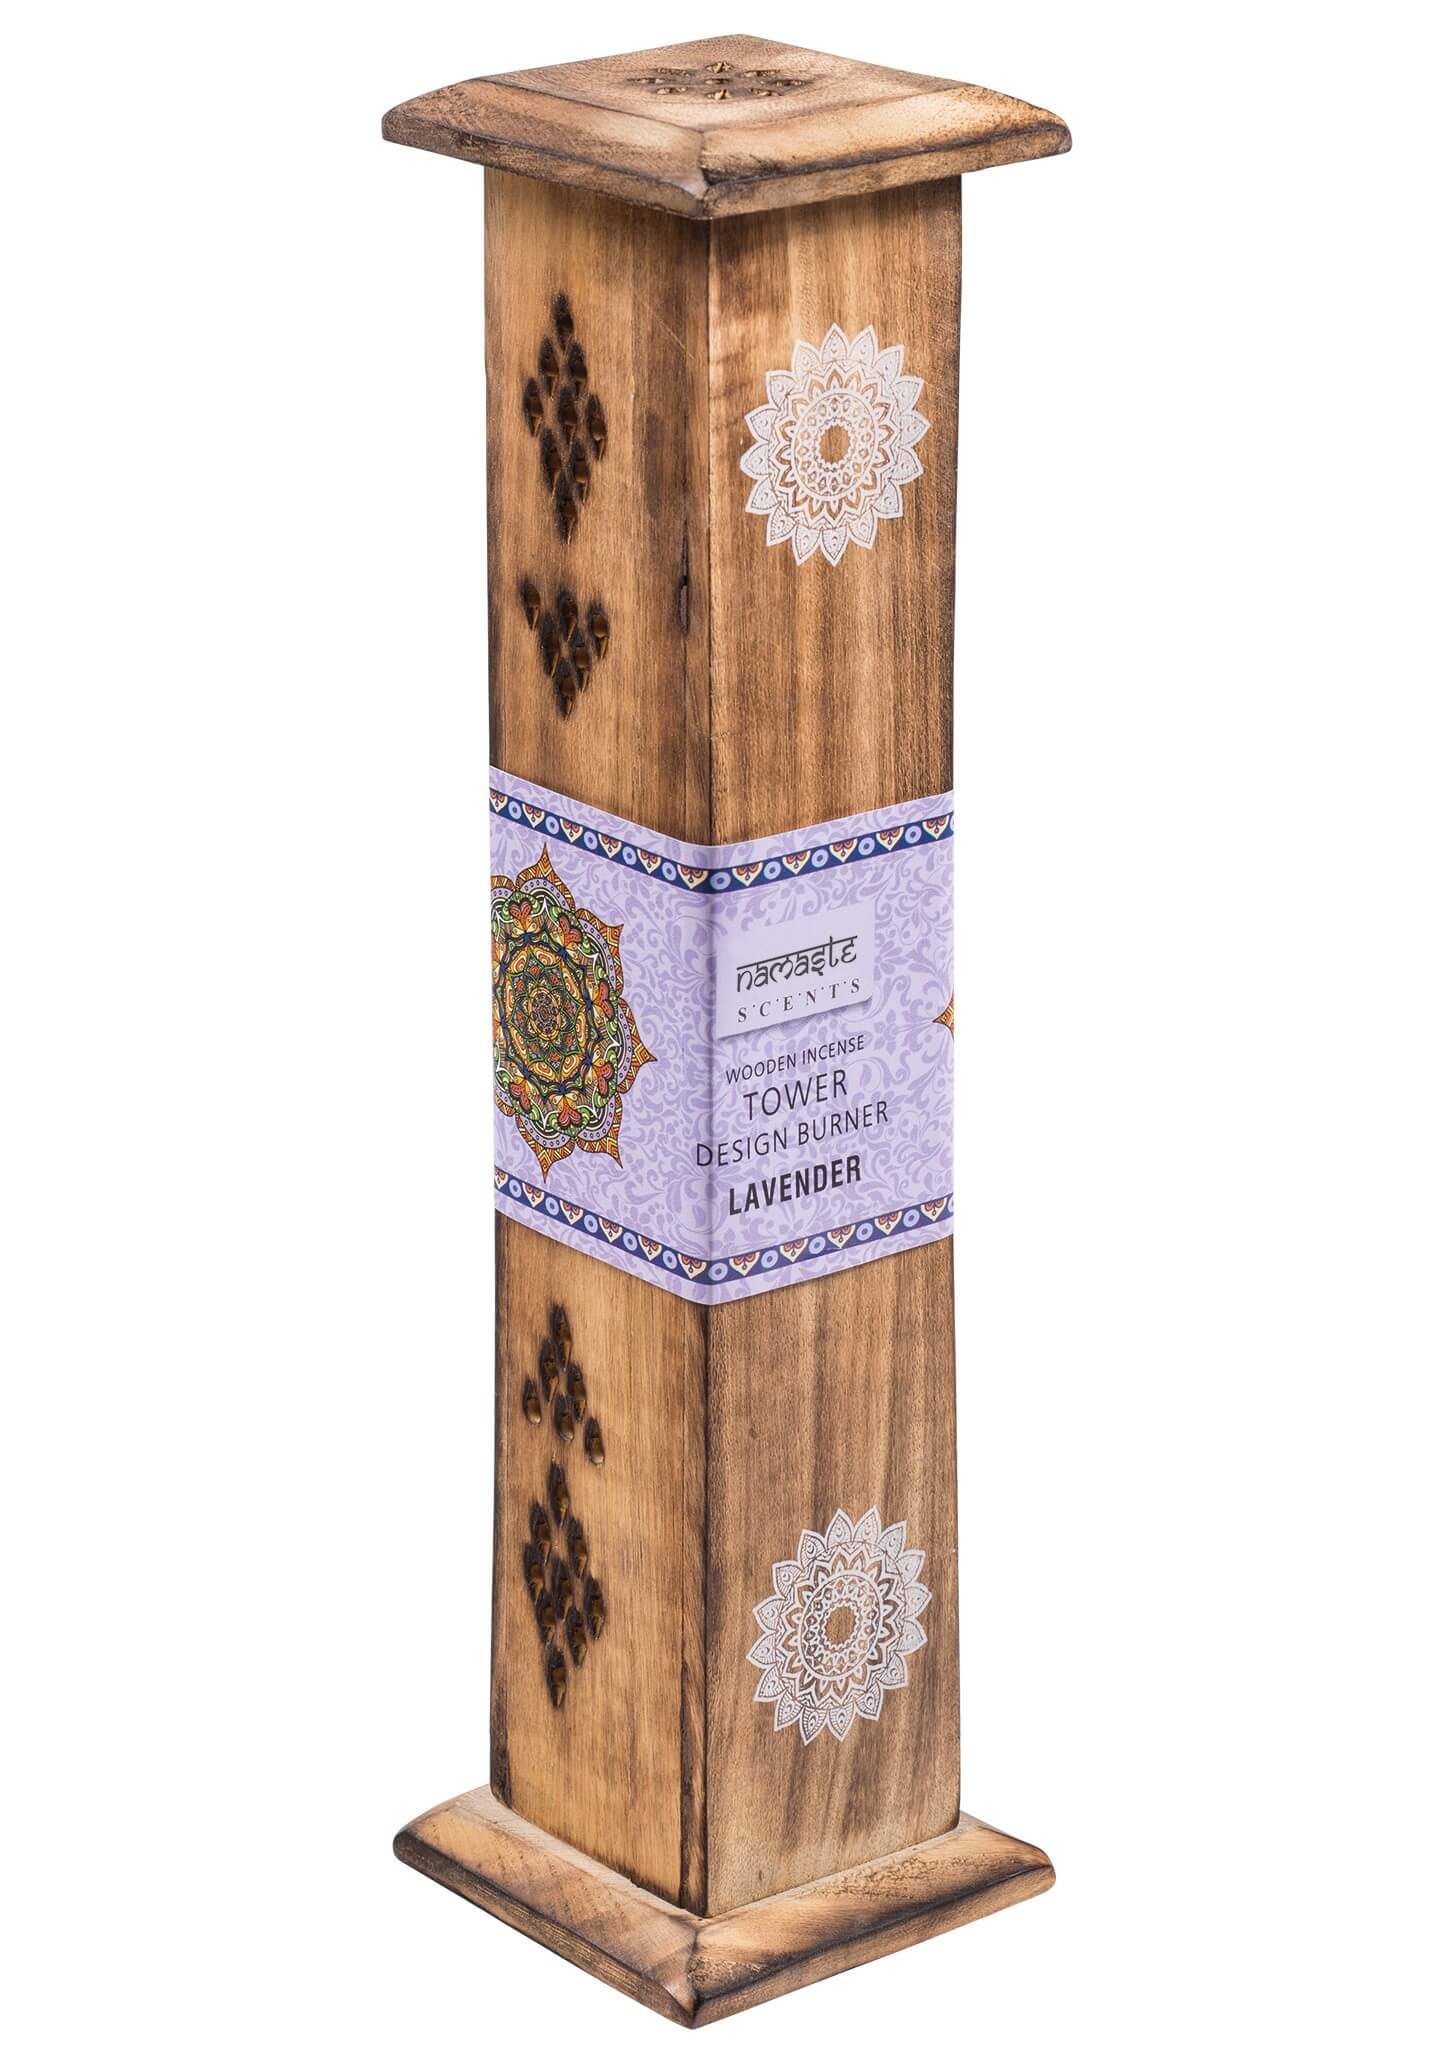 Mango Wood Incense Tower (with Incense) - lavender